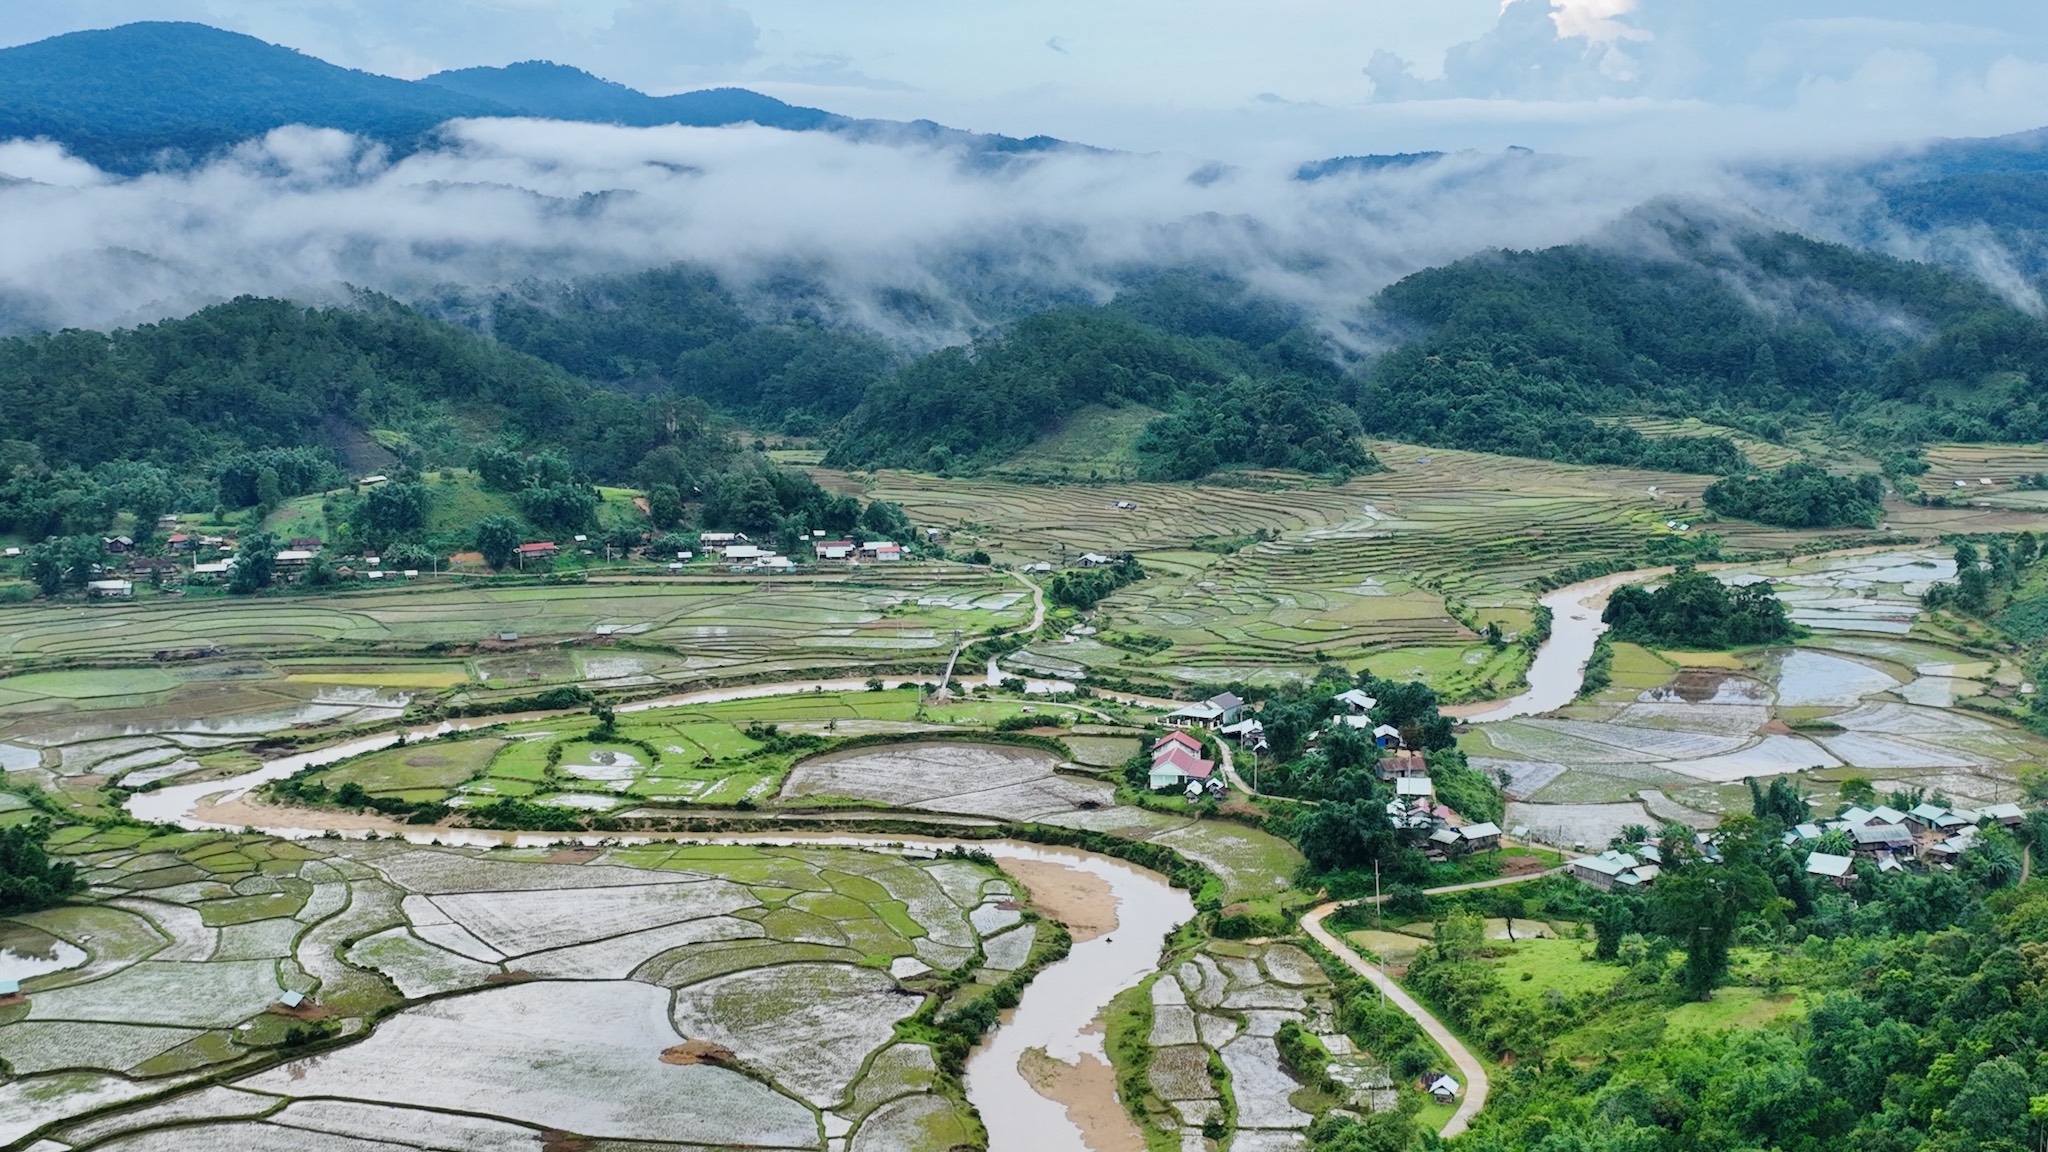 The view of Mang Den from above. Photo: Bui Viet Ha